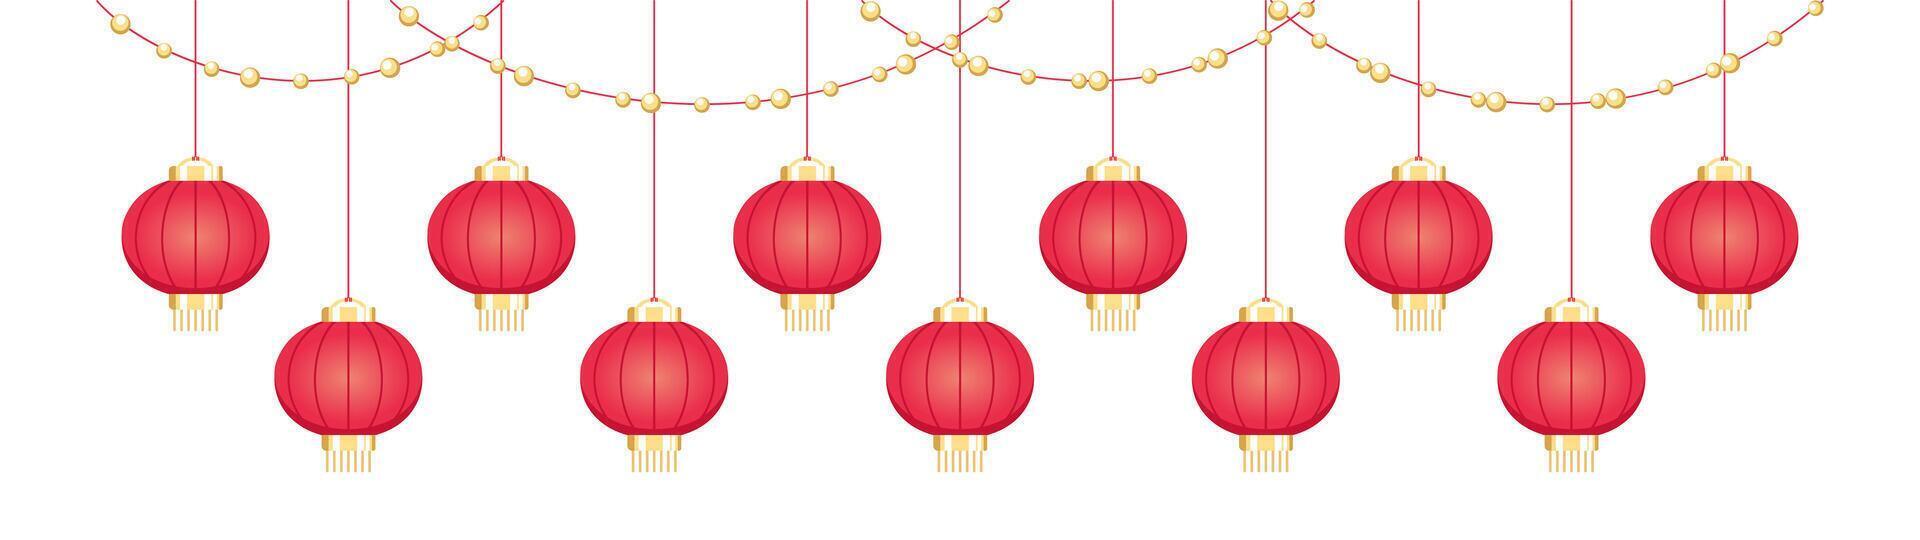 Hanging Chinese Lanterns Banner Border, Lunar New Year and Mid-Autumn Festival Decoration Graphic vector